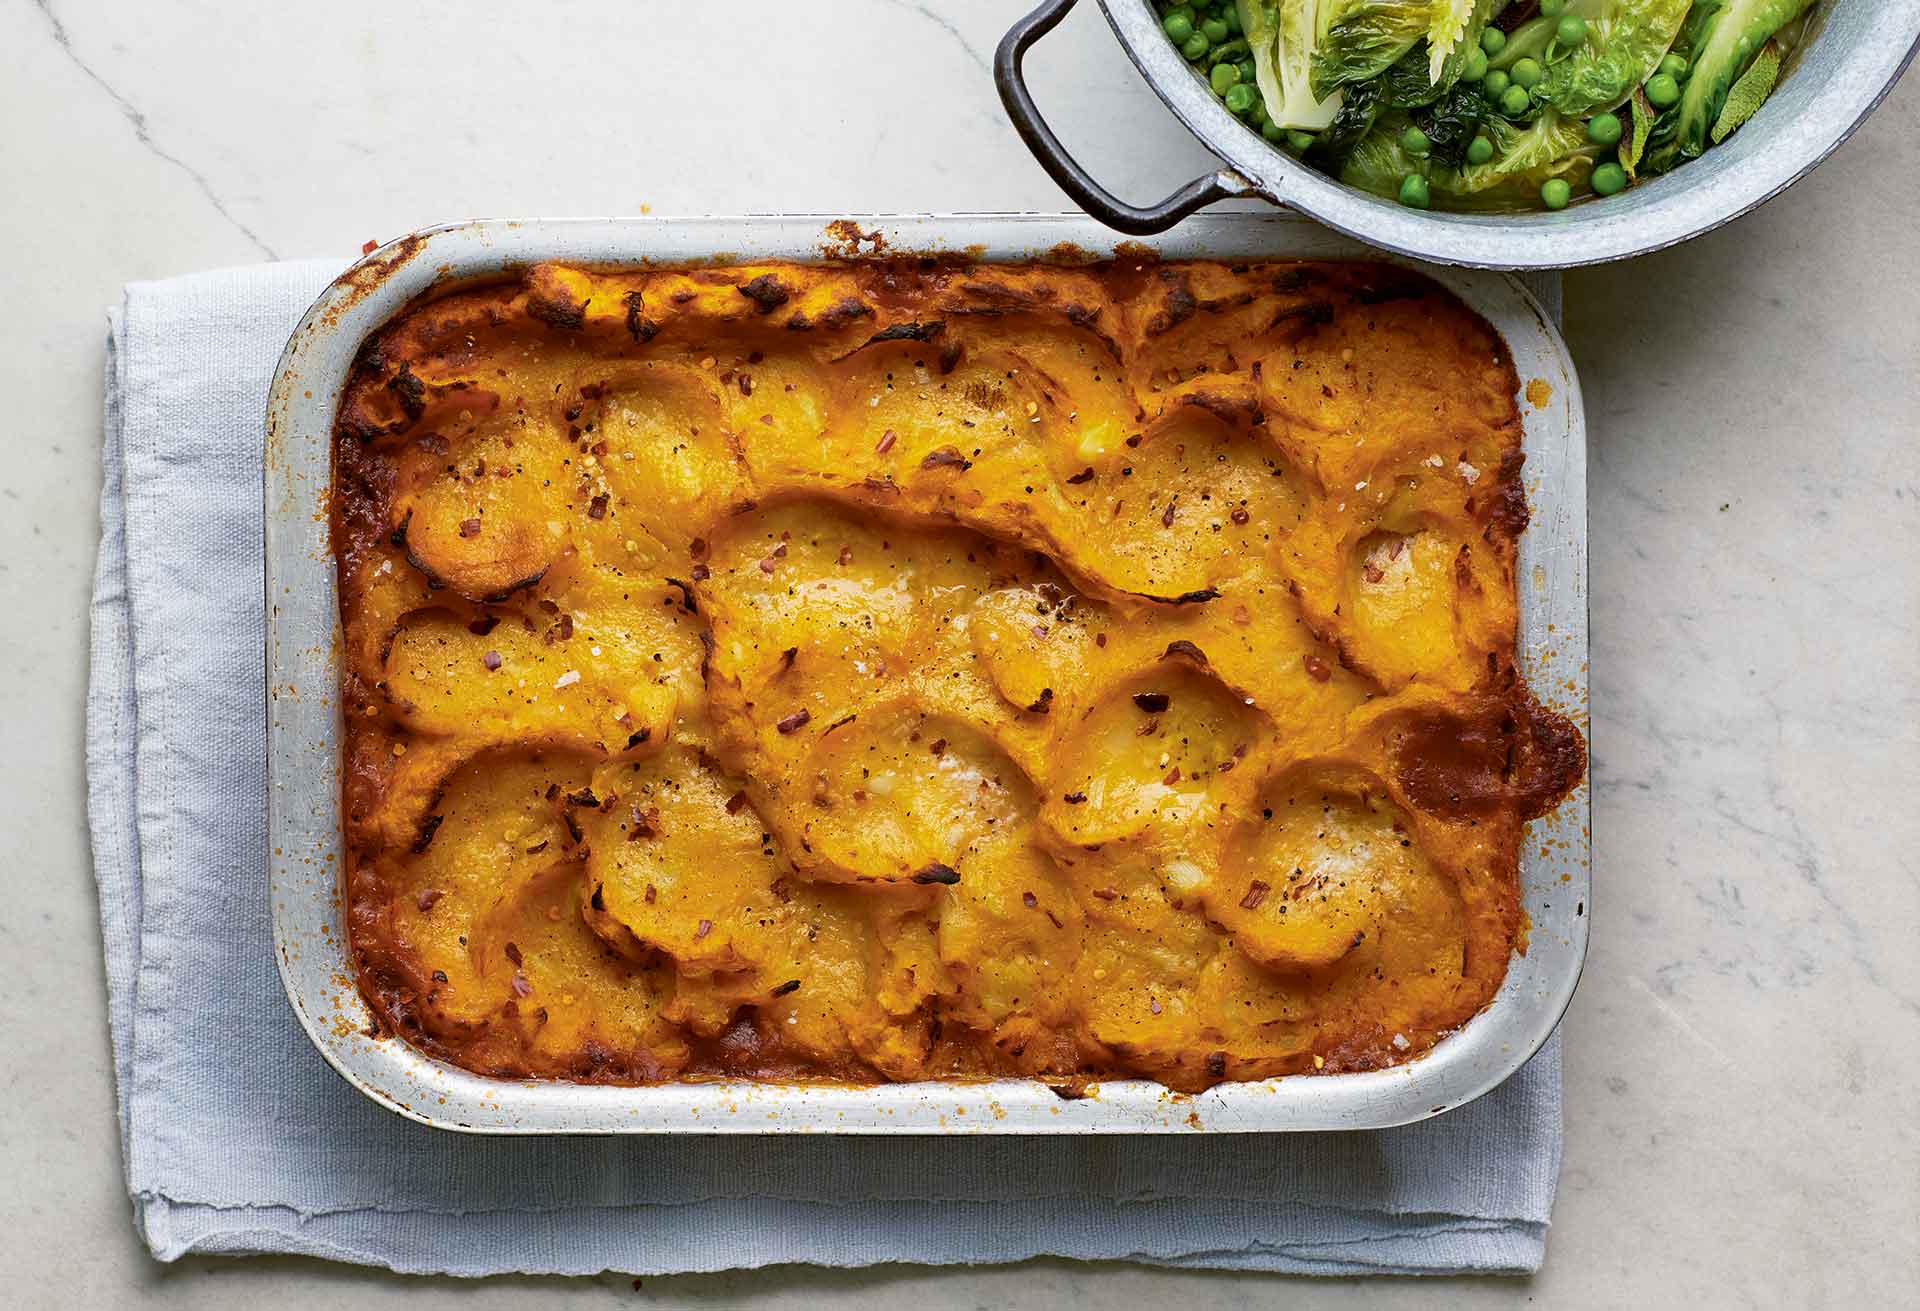 Eco-friendly cooking with Spiced Shepherdess Pie from "Eat Green"